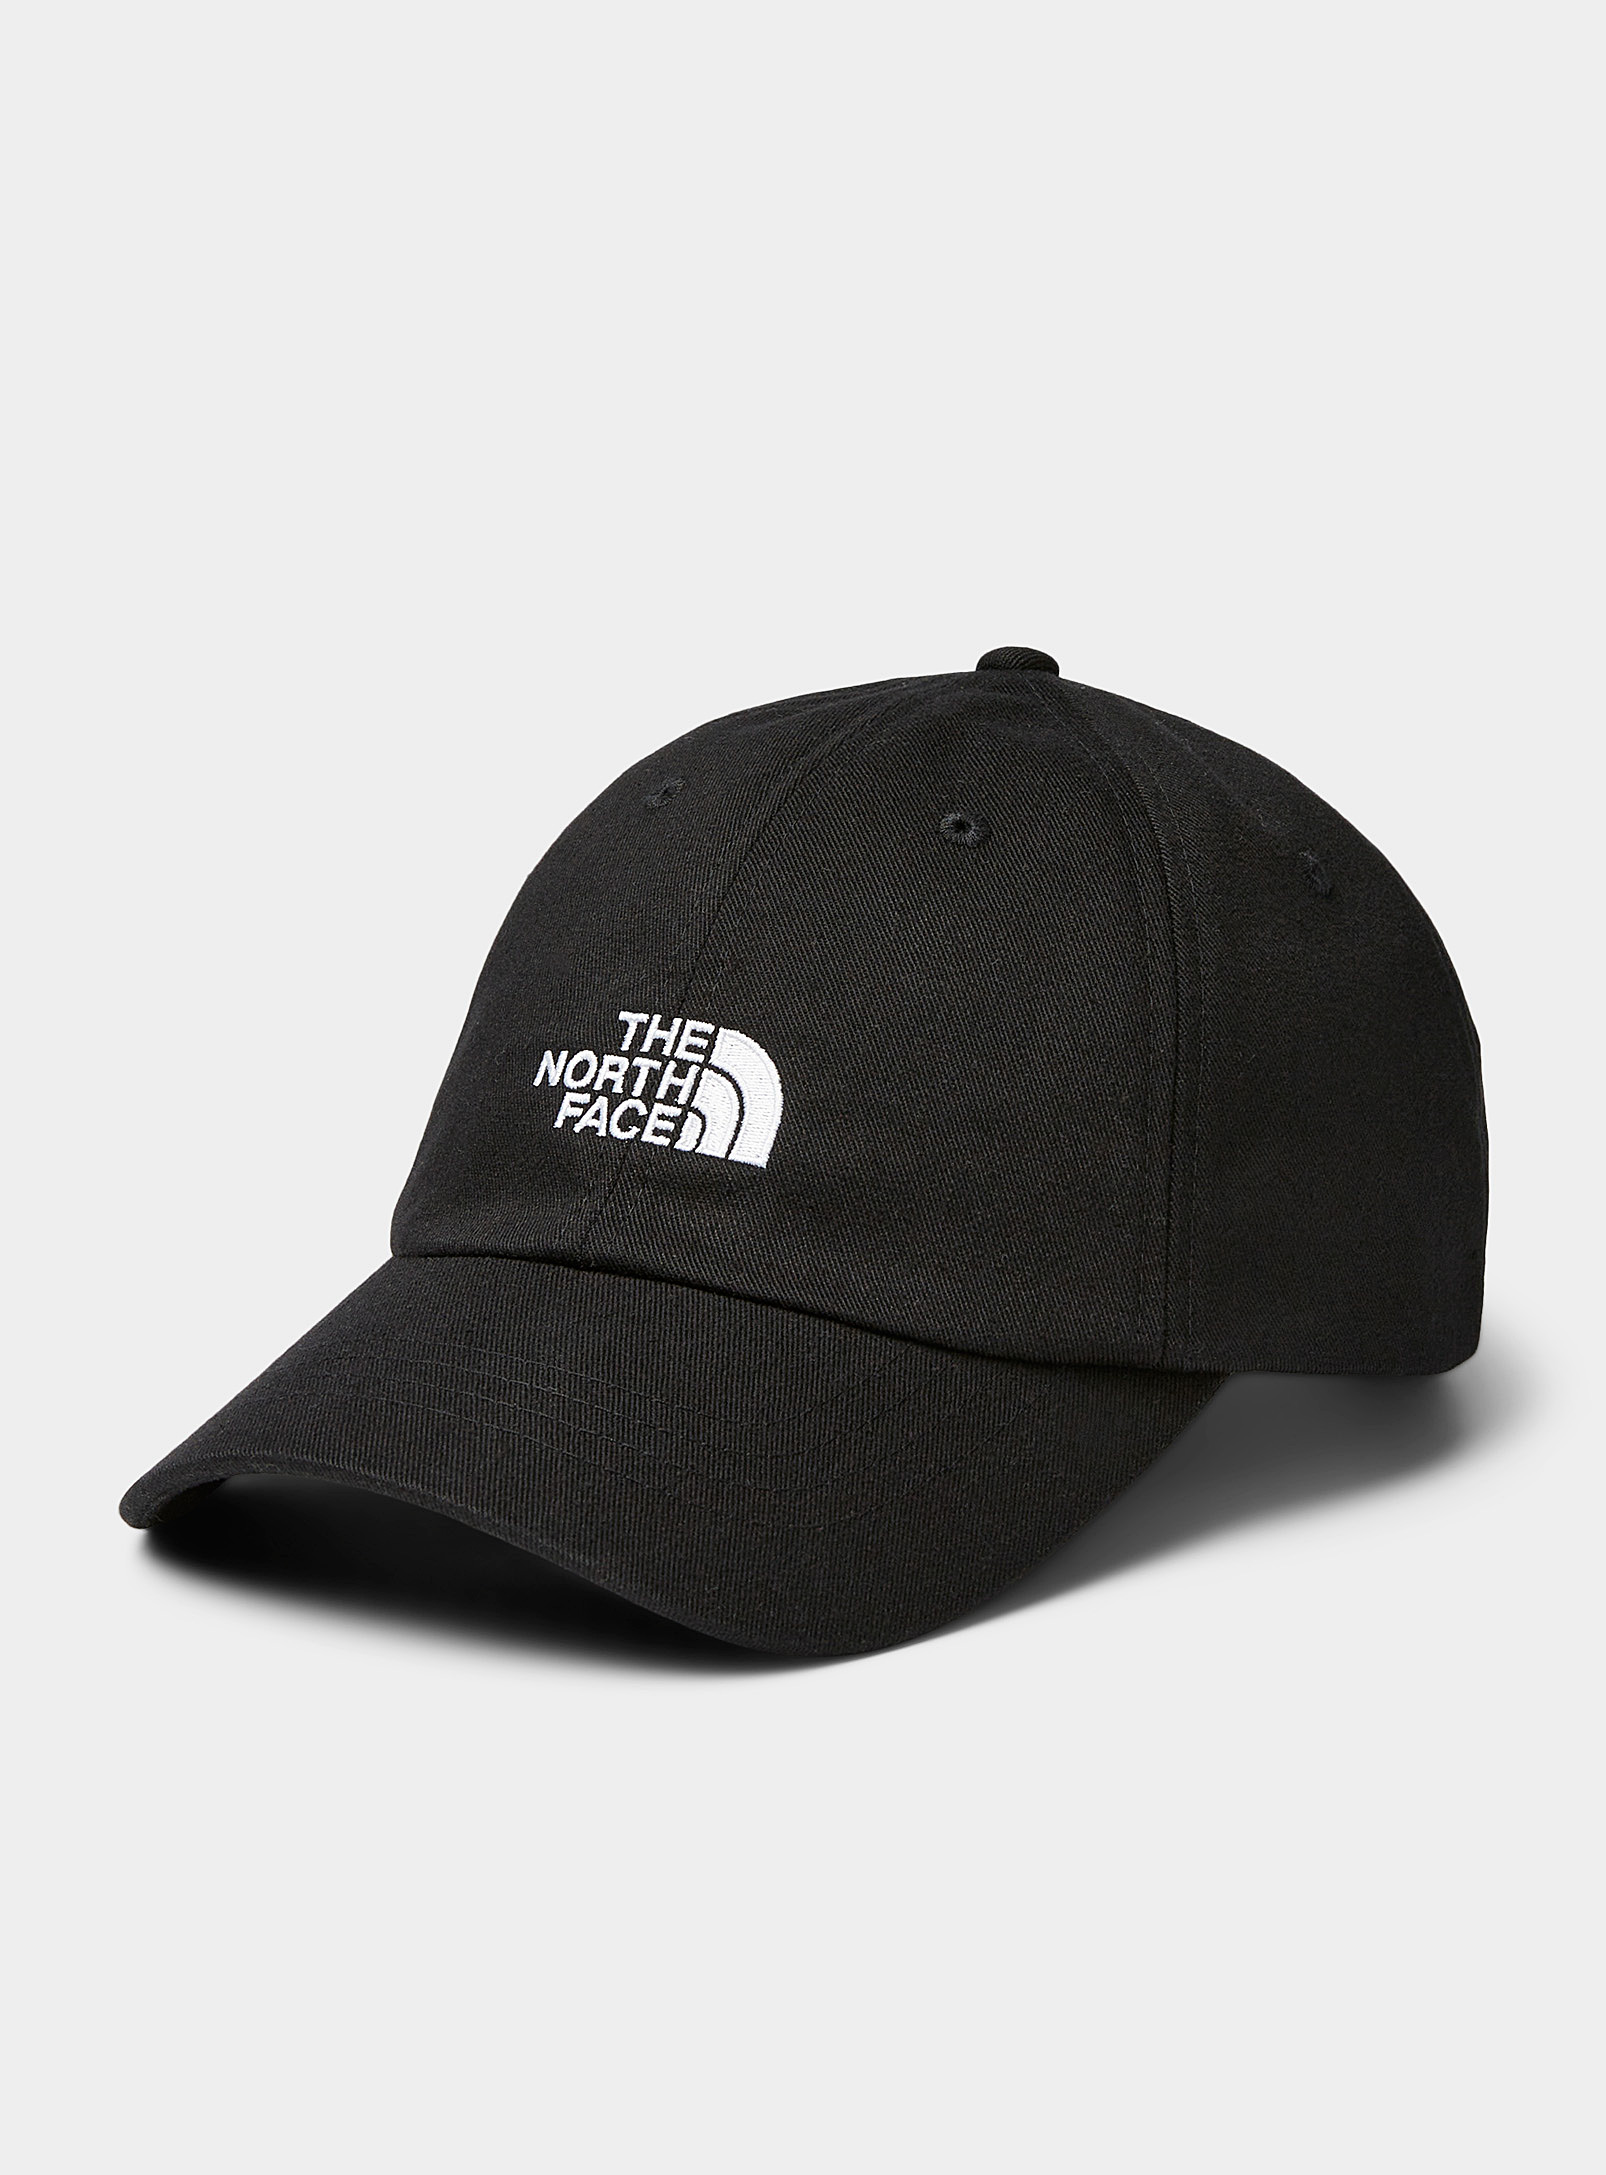 The North Face Solid Logo Cap In Black